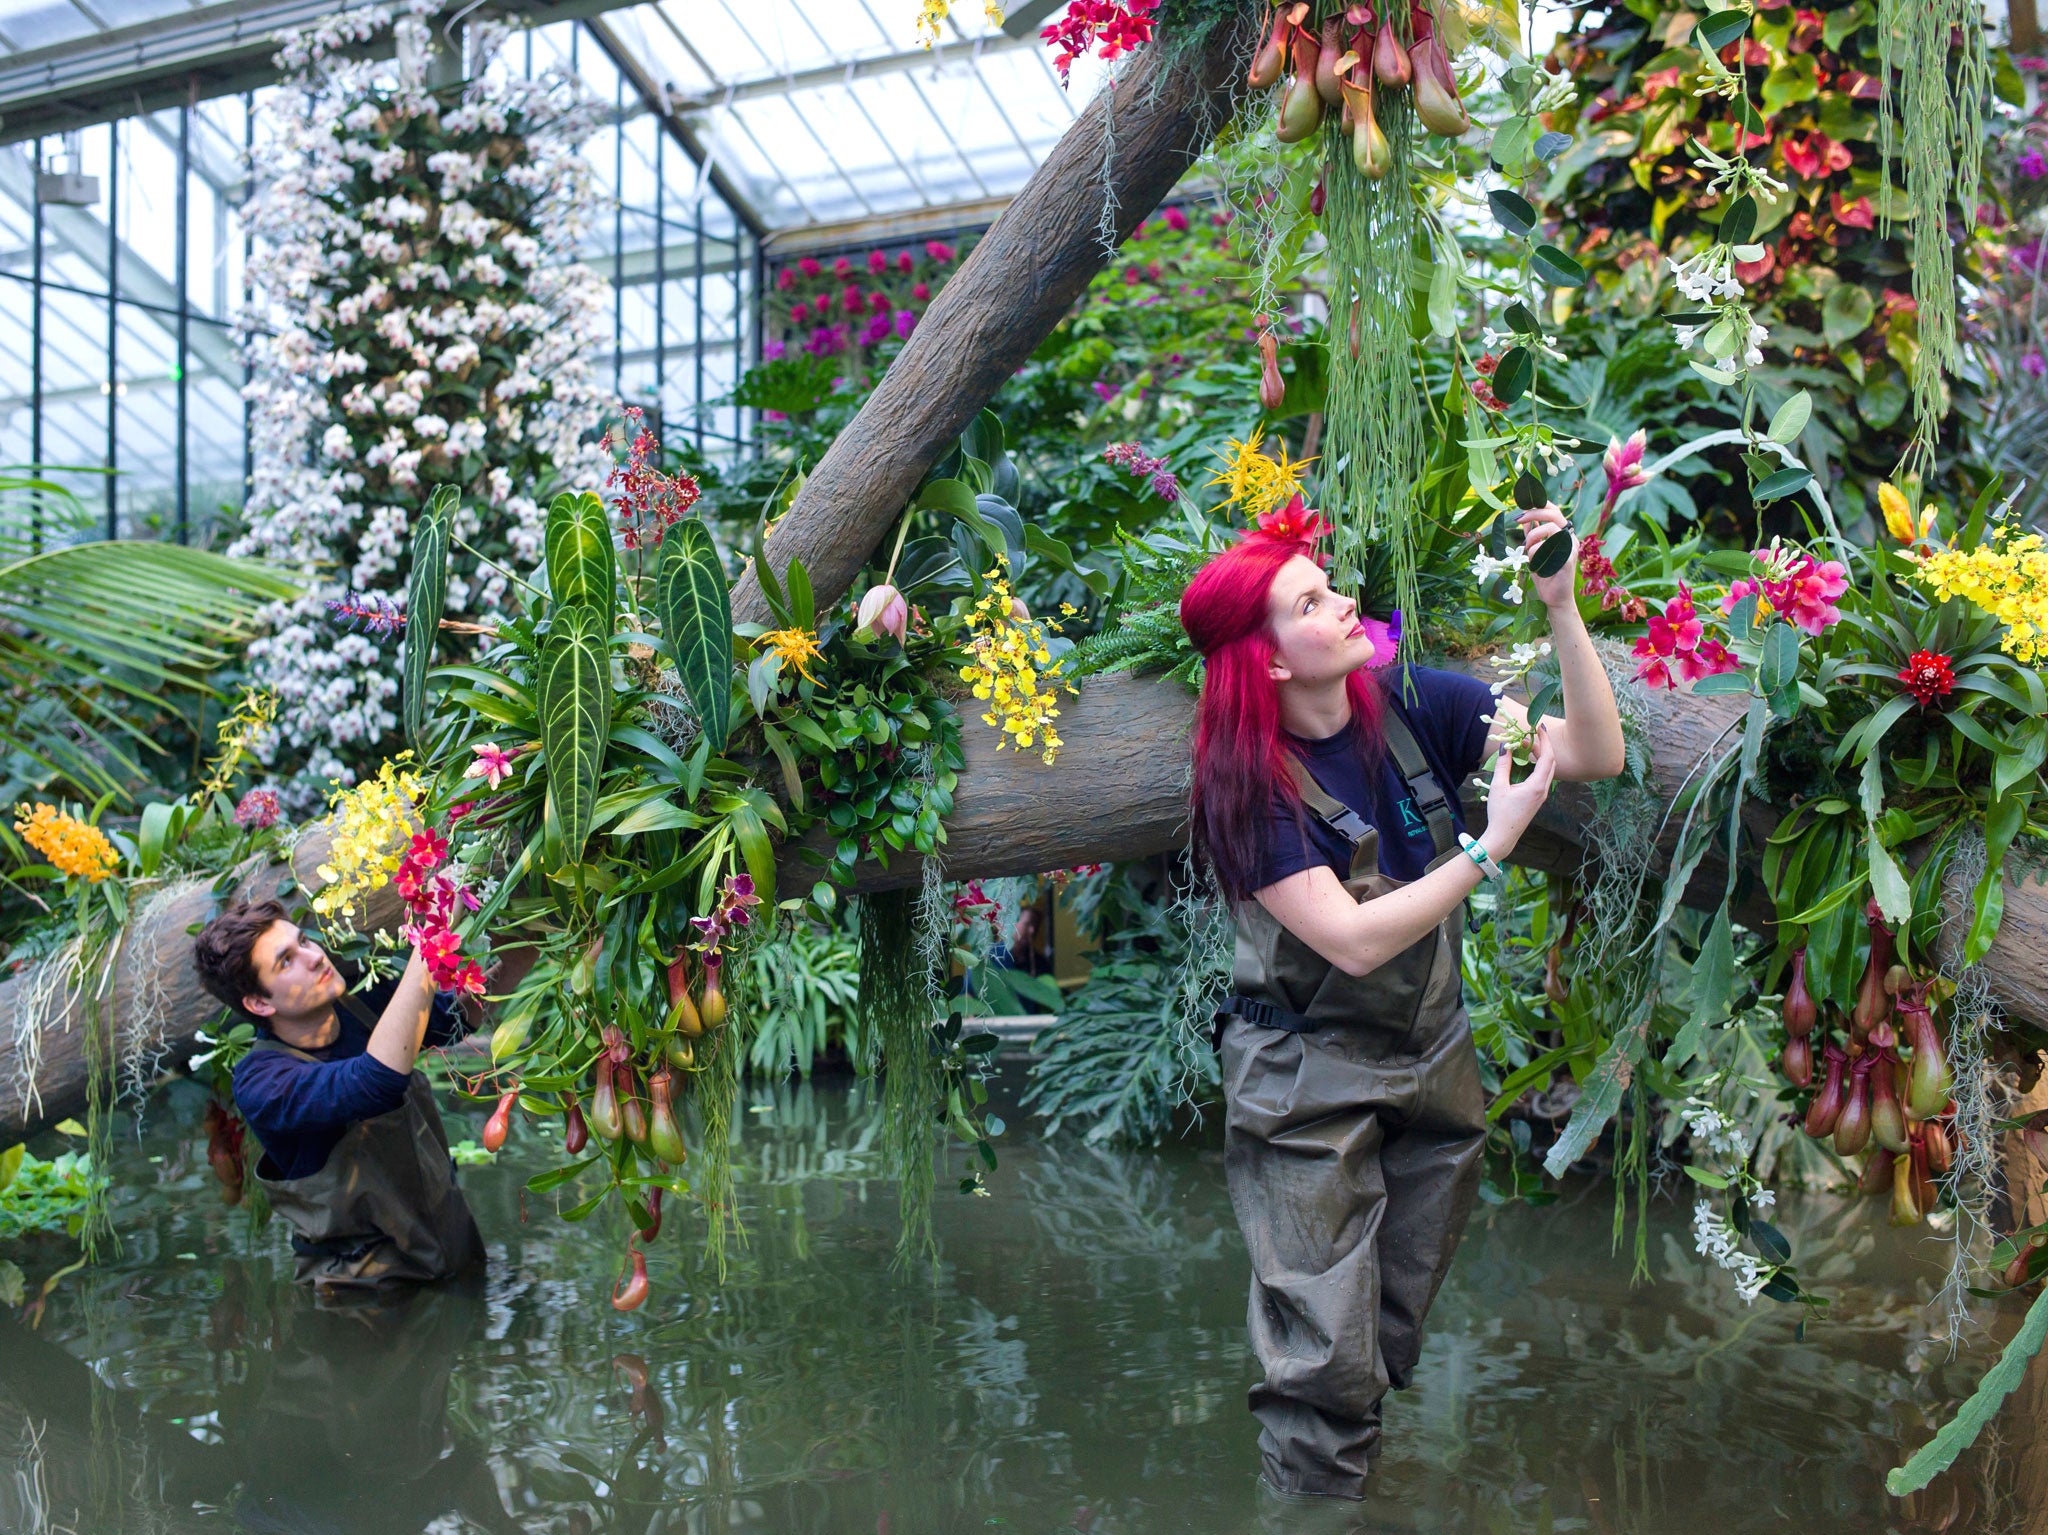 Workers of the Royal Botanic Gardens, Alex Hoyle and Elisa Biondo put final touches to the orchids